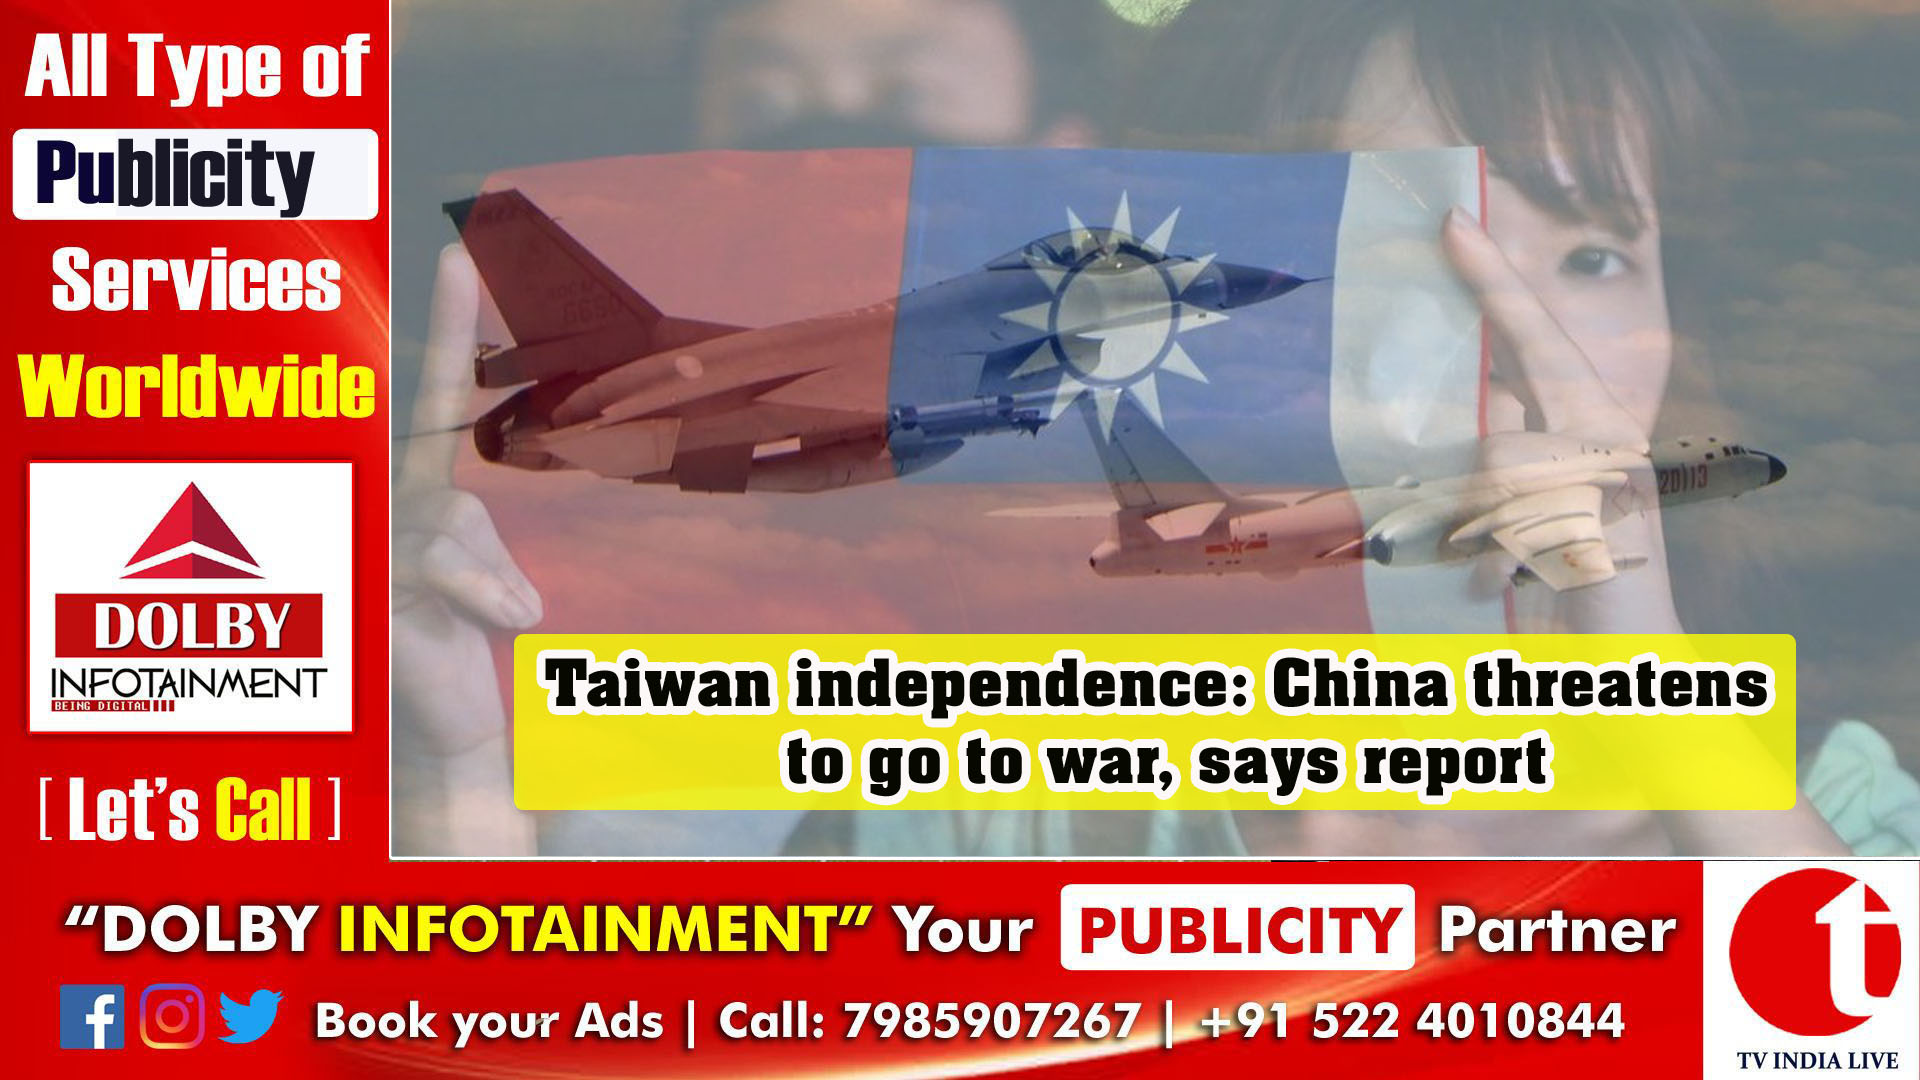 Taiwan independence: China threatens to go to war, says report